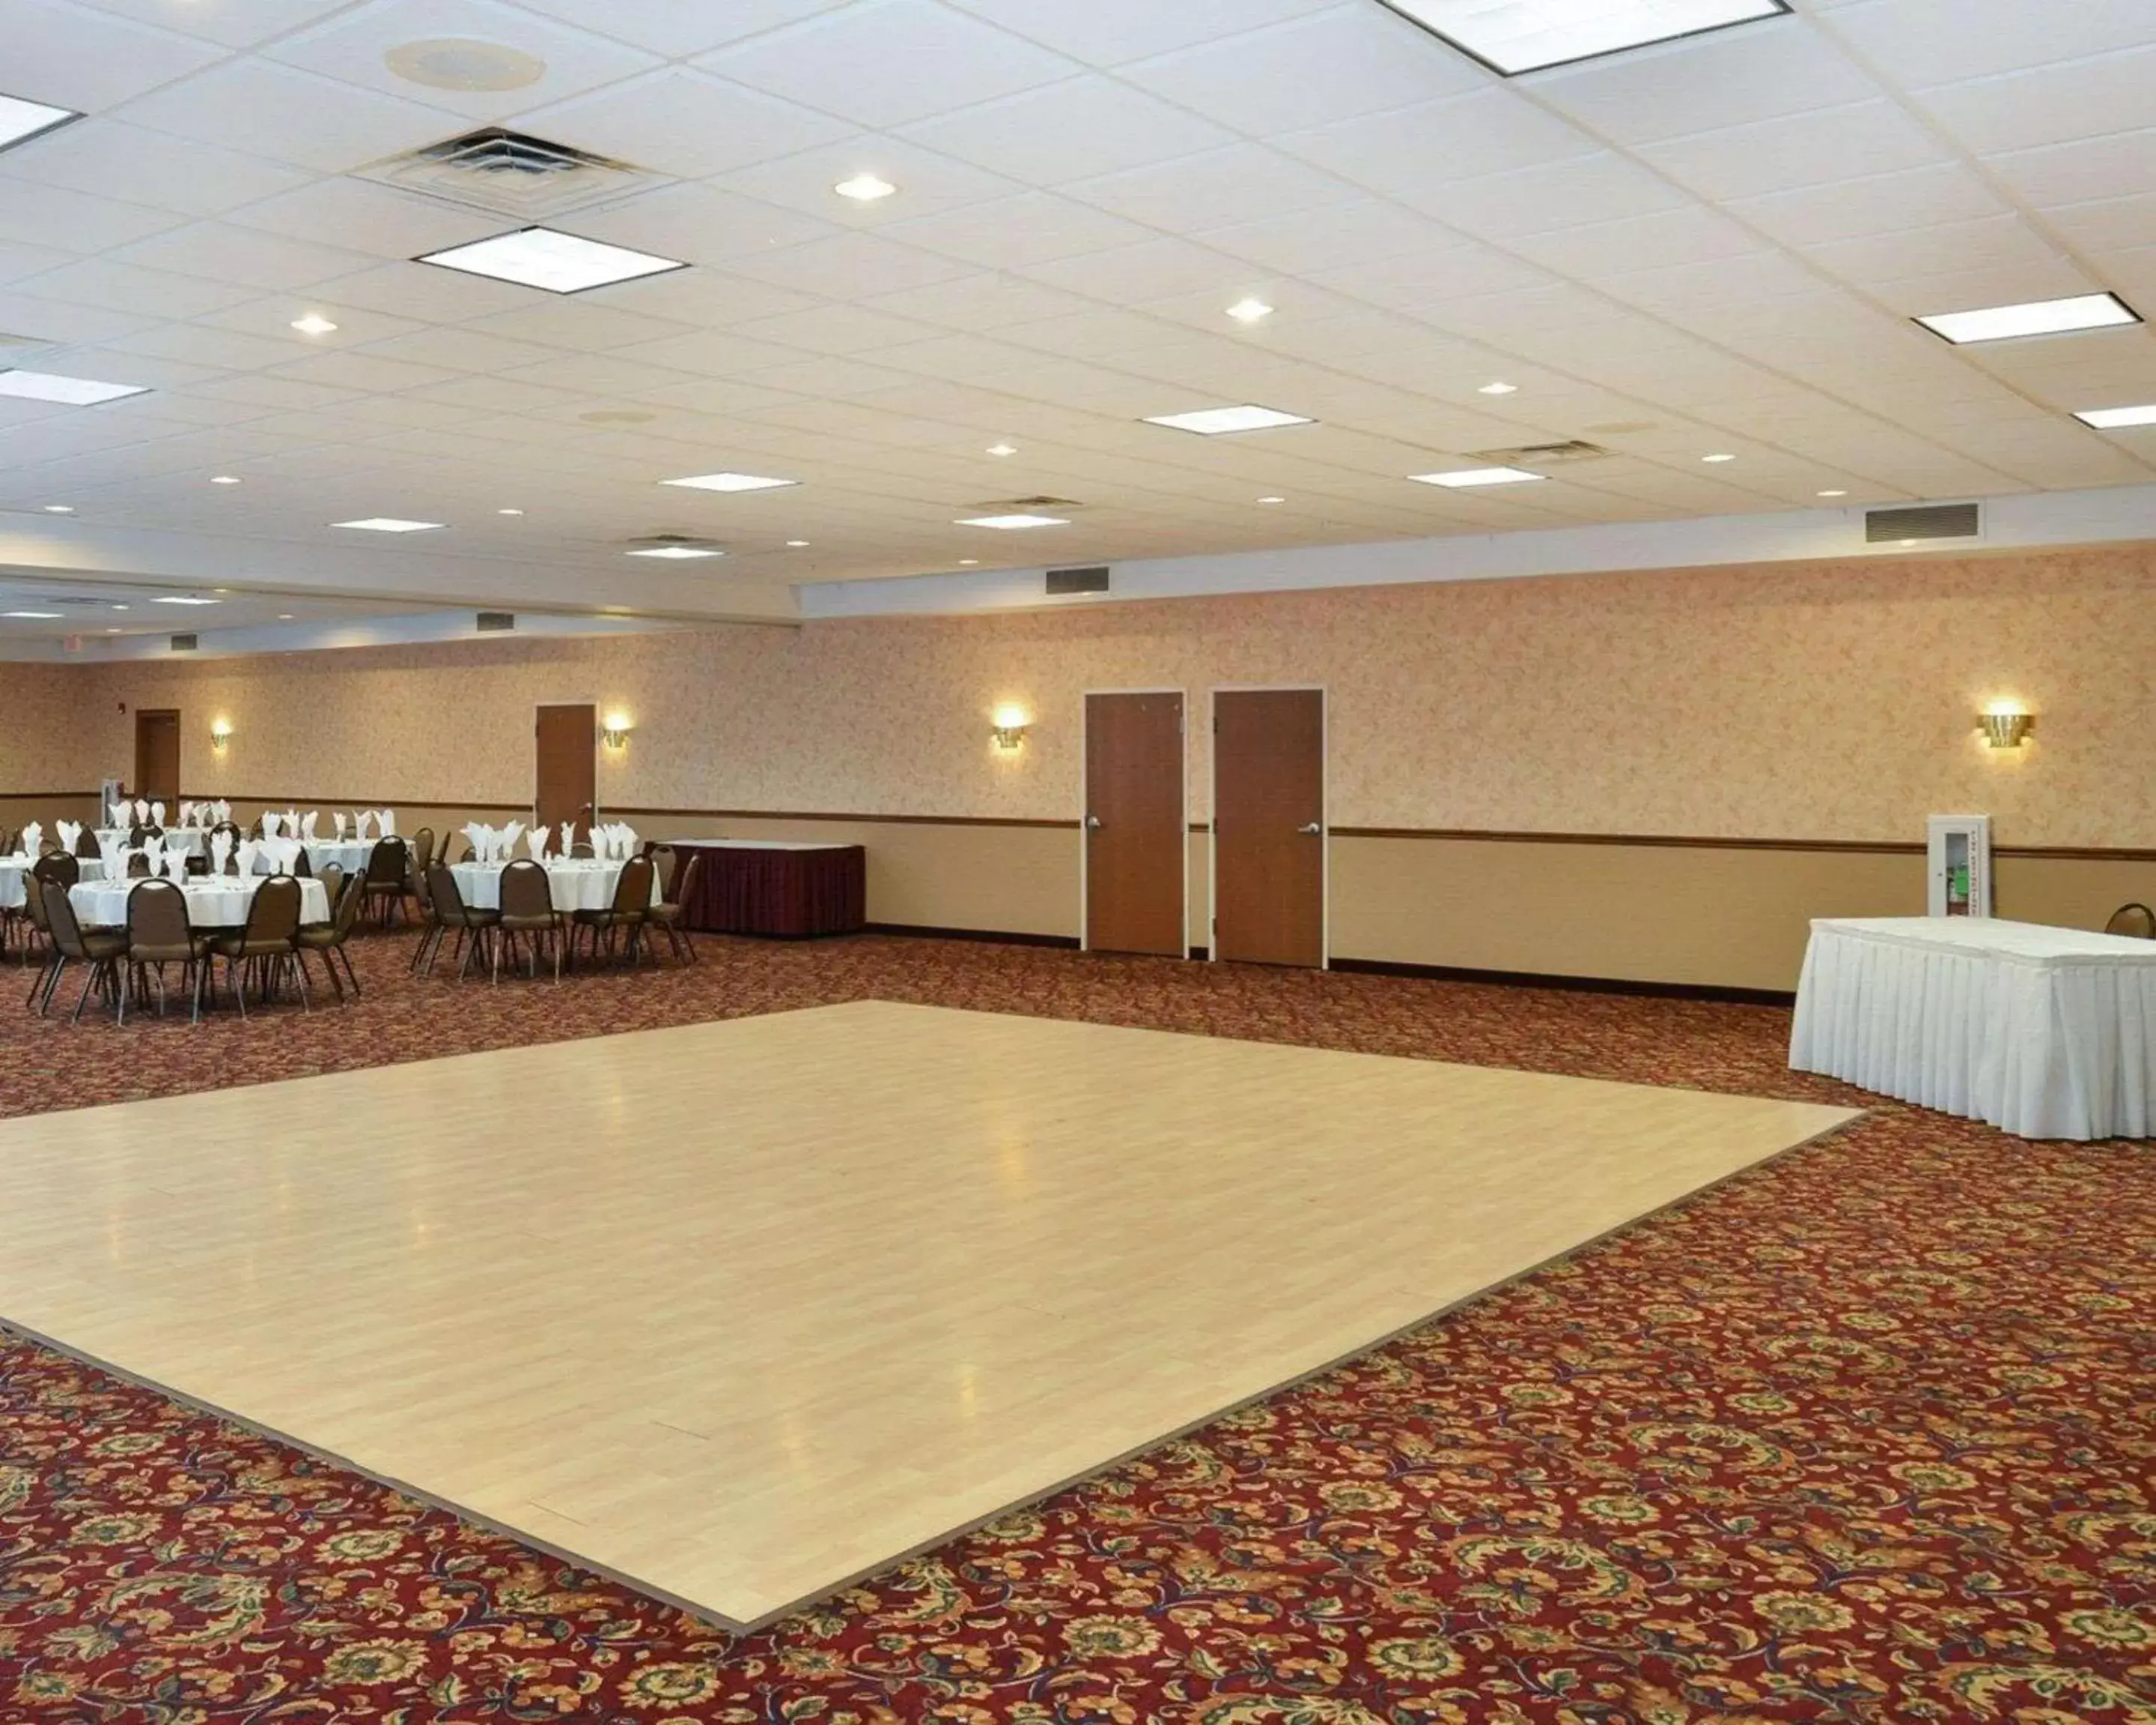 On site, Banquet Facilities in Quality Inn & Suites Fort Madison near Hwy 61